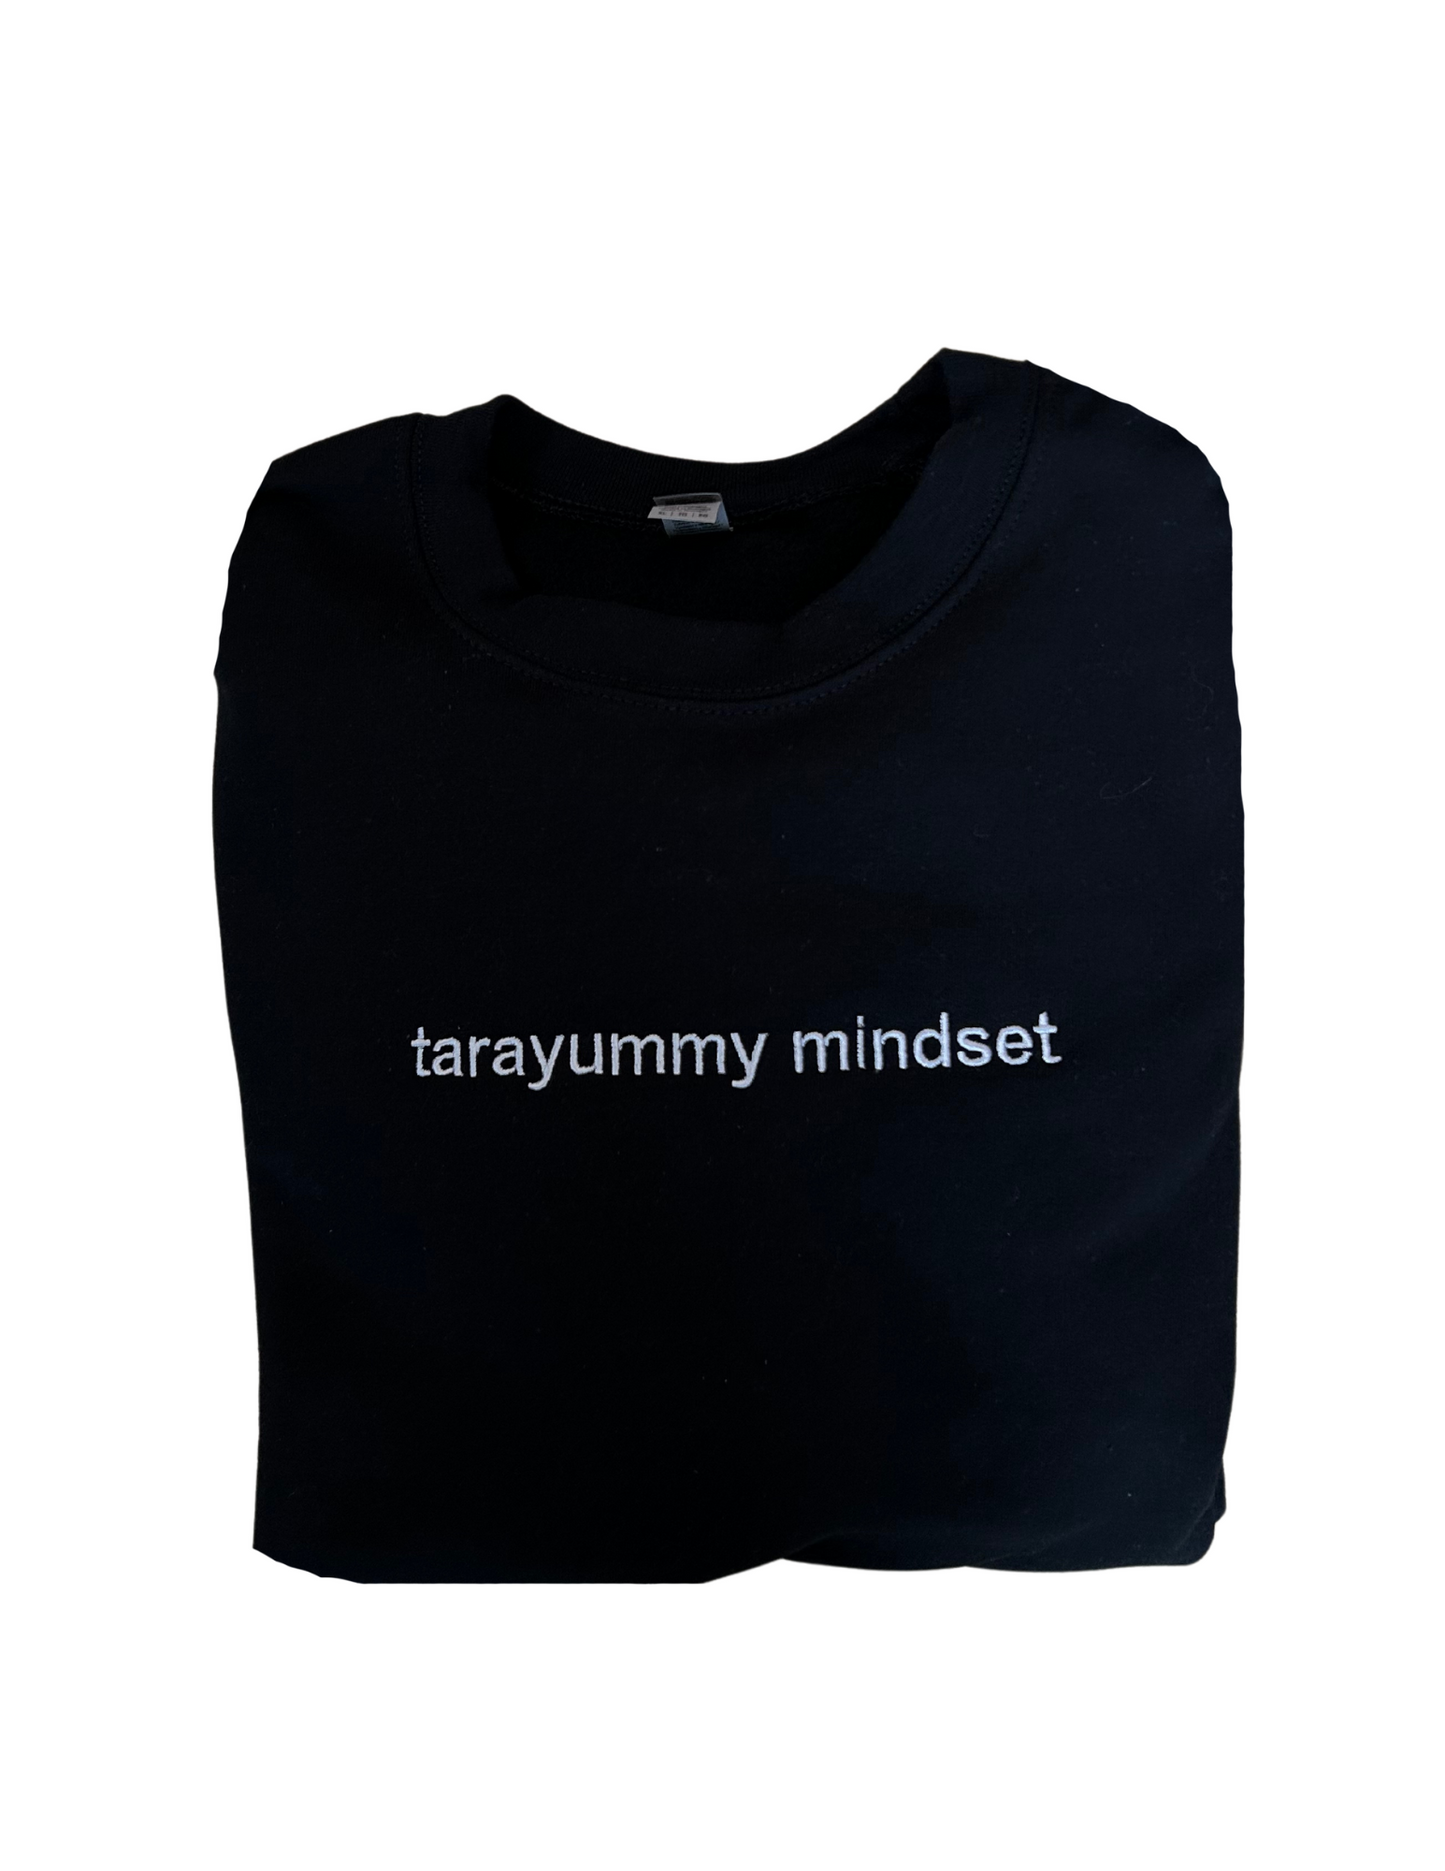 Embroidered 'Tarayummy Mindset' Hoodie or Crew Neck, Long Sleeve, Classic fit, Unisex, Adult